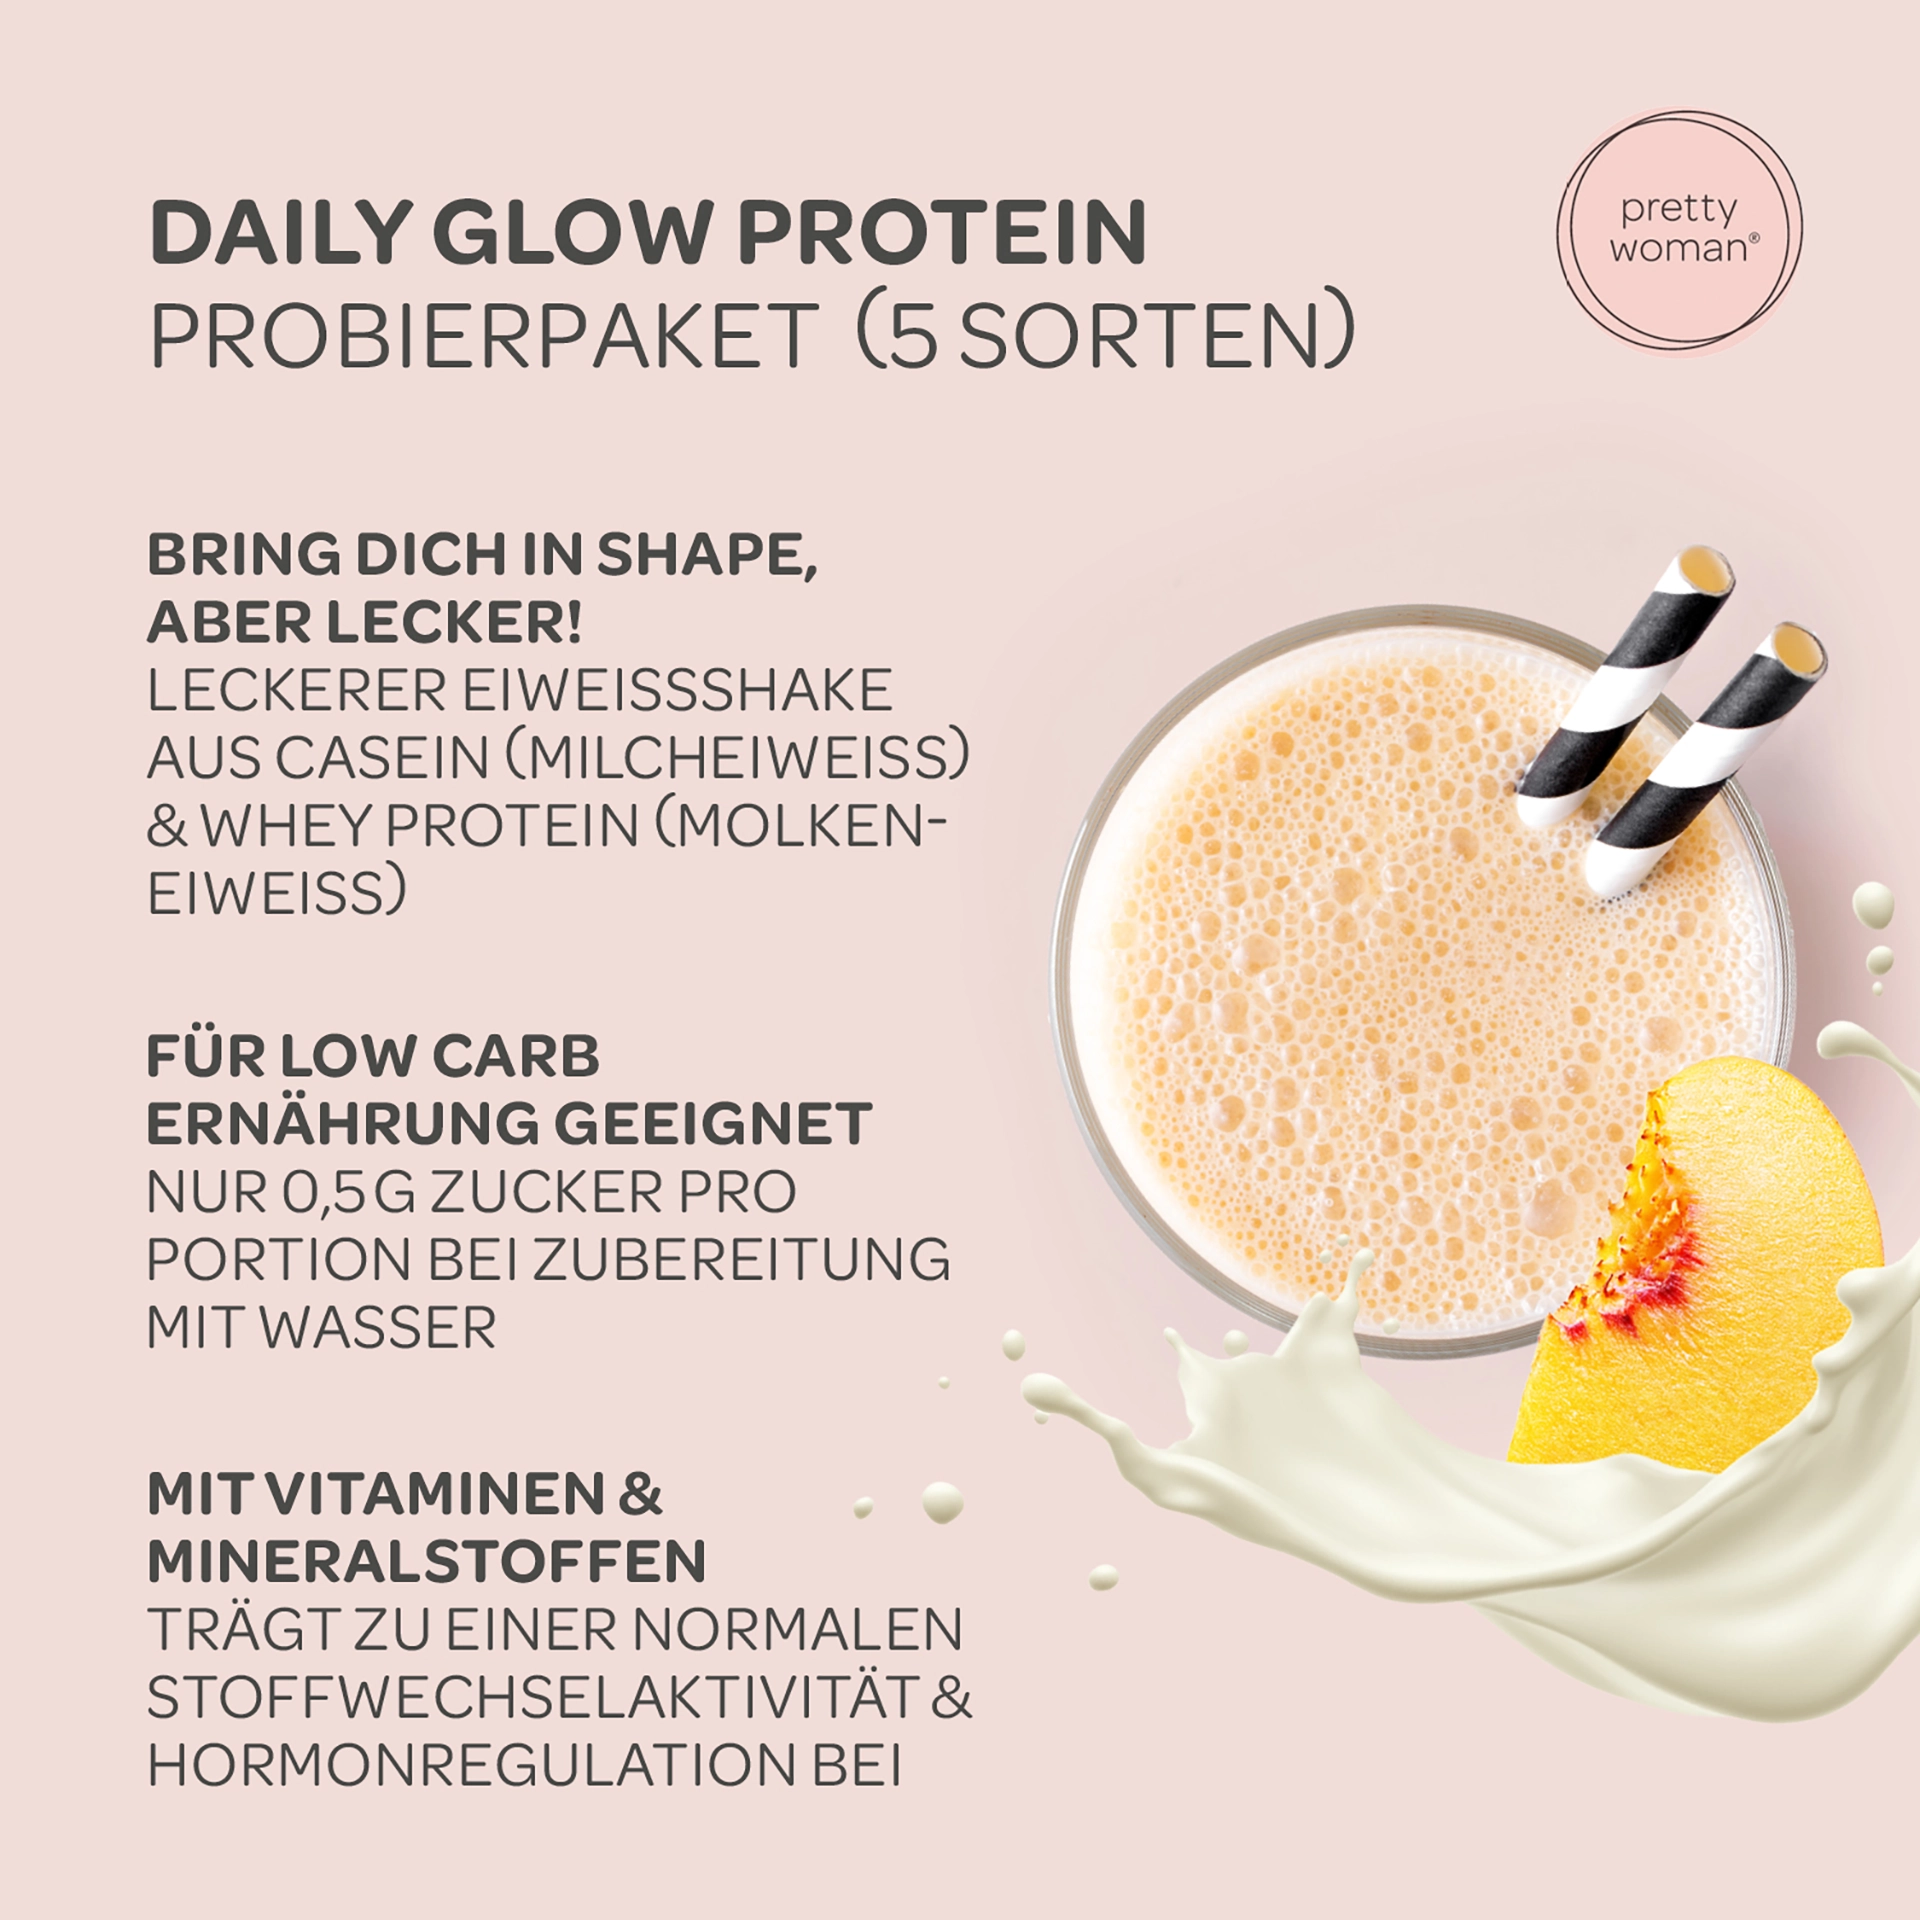 Daily Glow Protein Sample Package